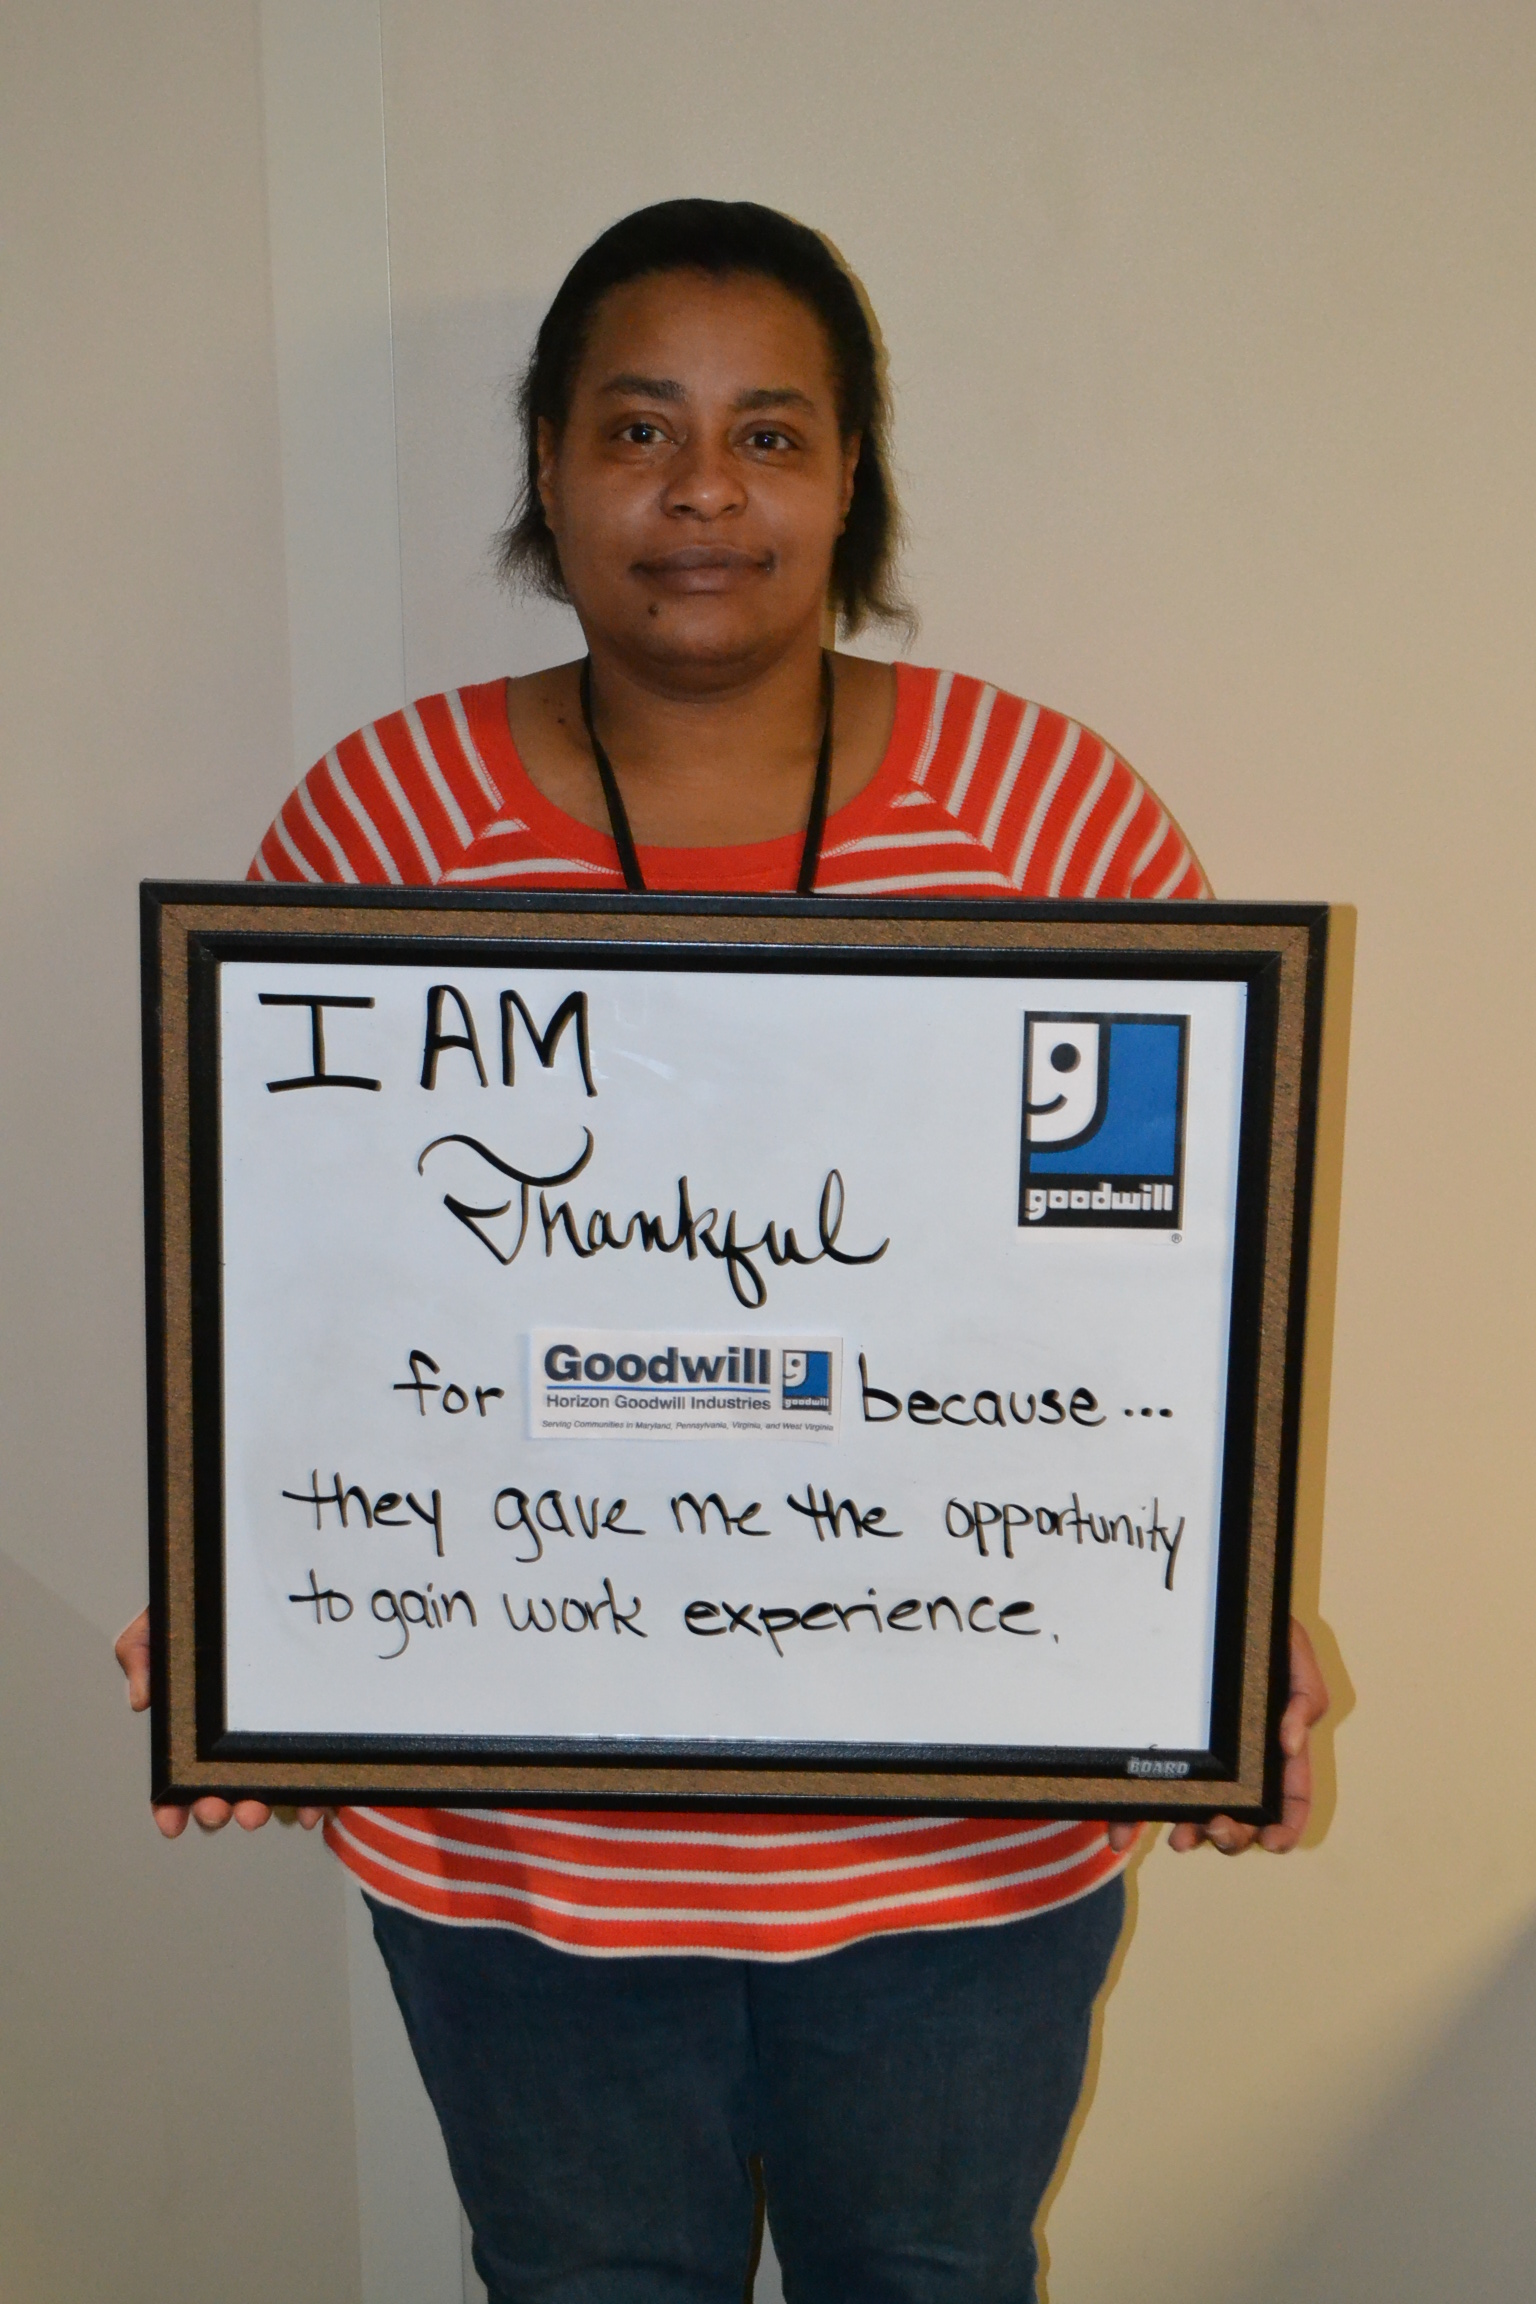 DSC 0161 - Horizon Goodwill Asks “What Are You Grateful For This Thanksgiving?”